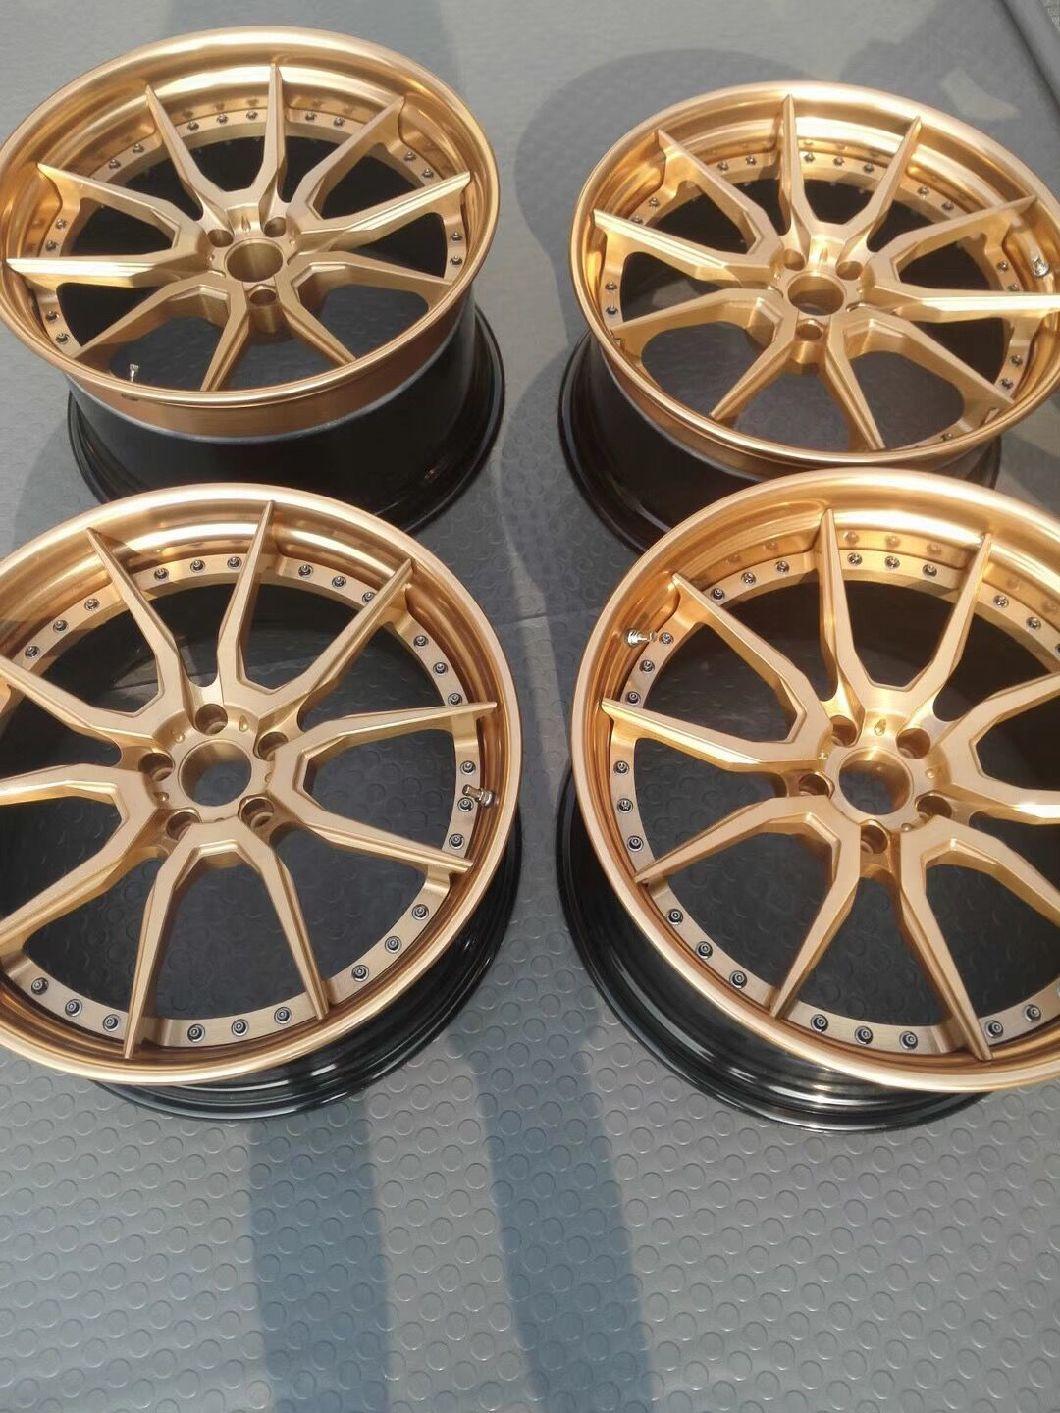 High Quality Forged Aluminum Wheel for Audi